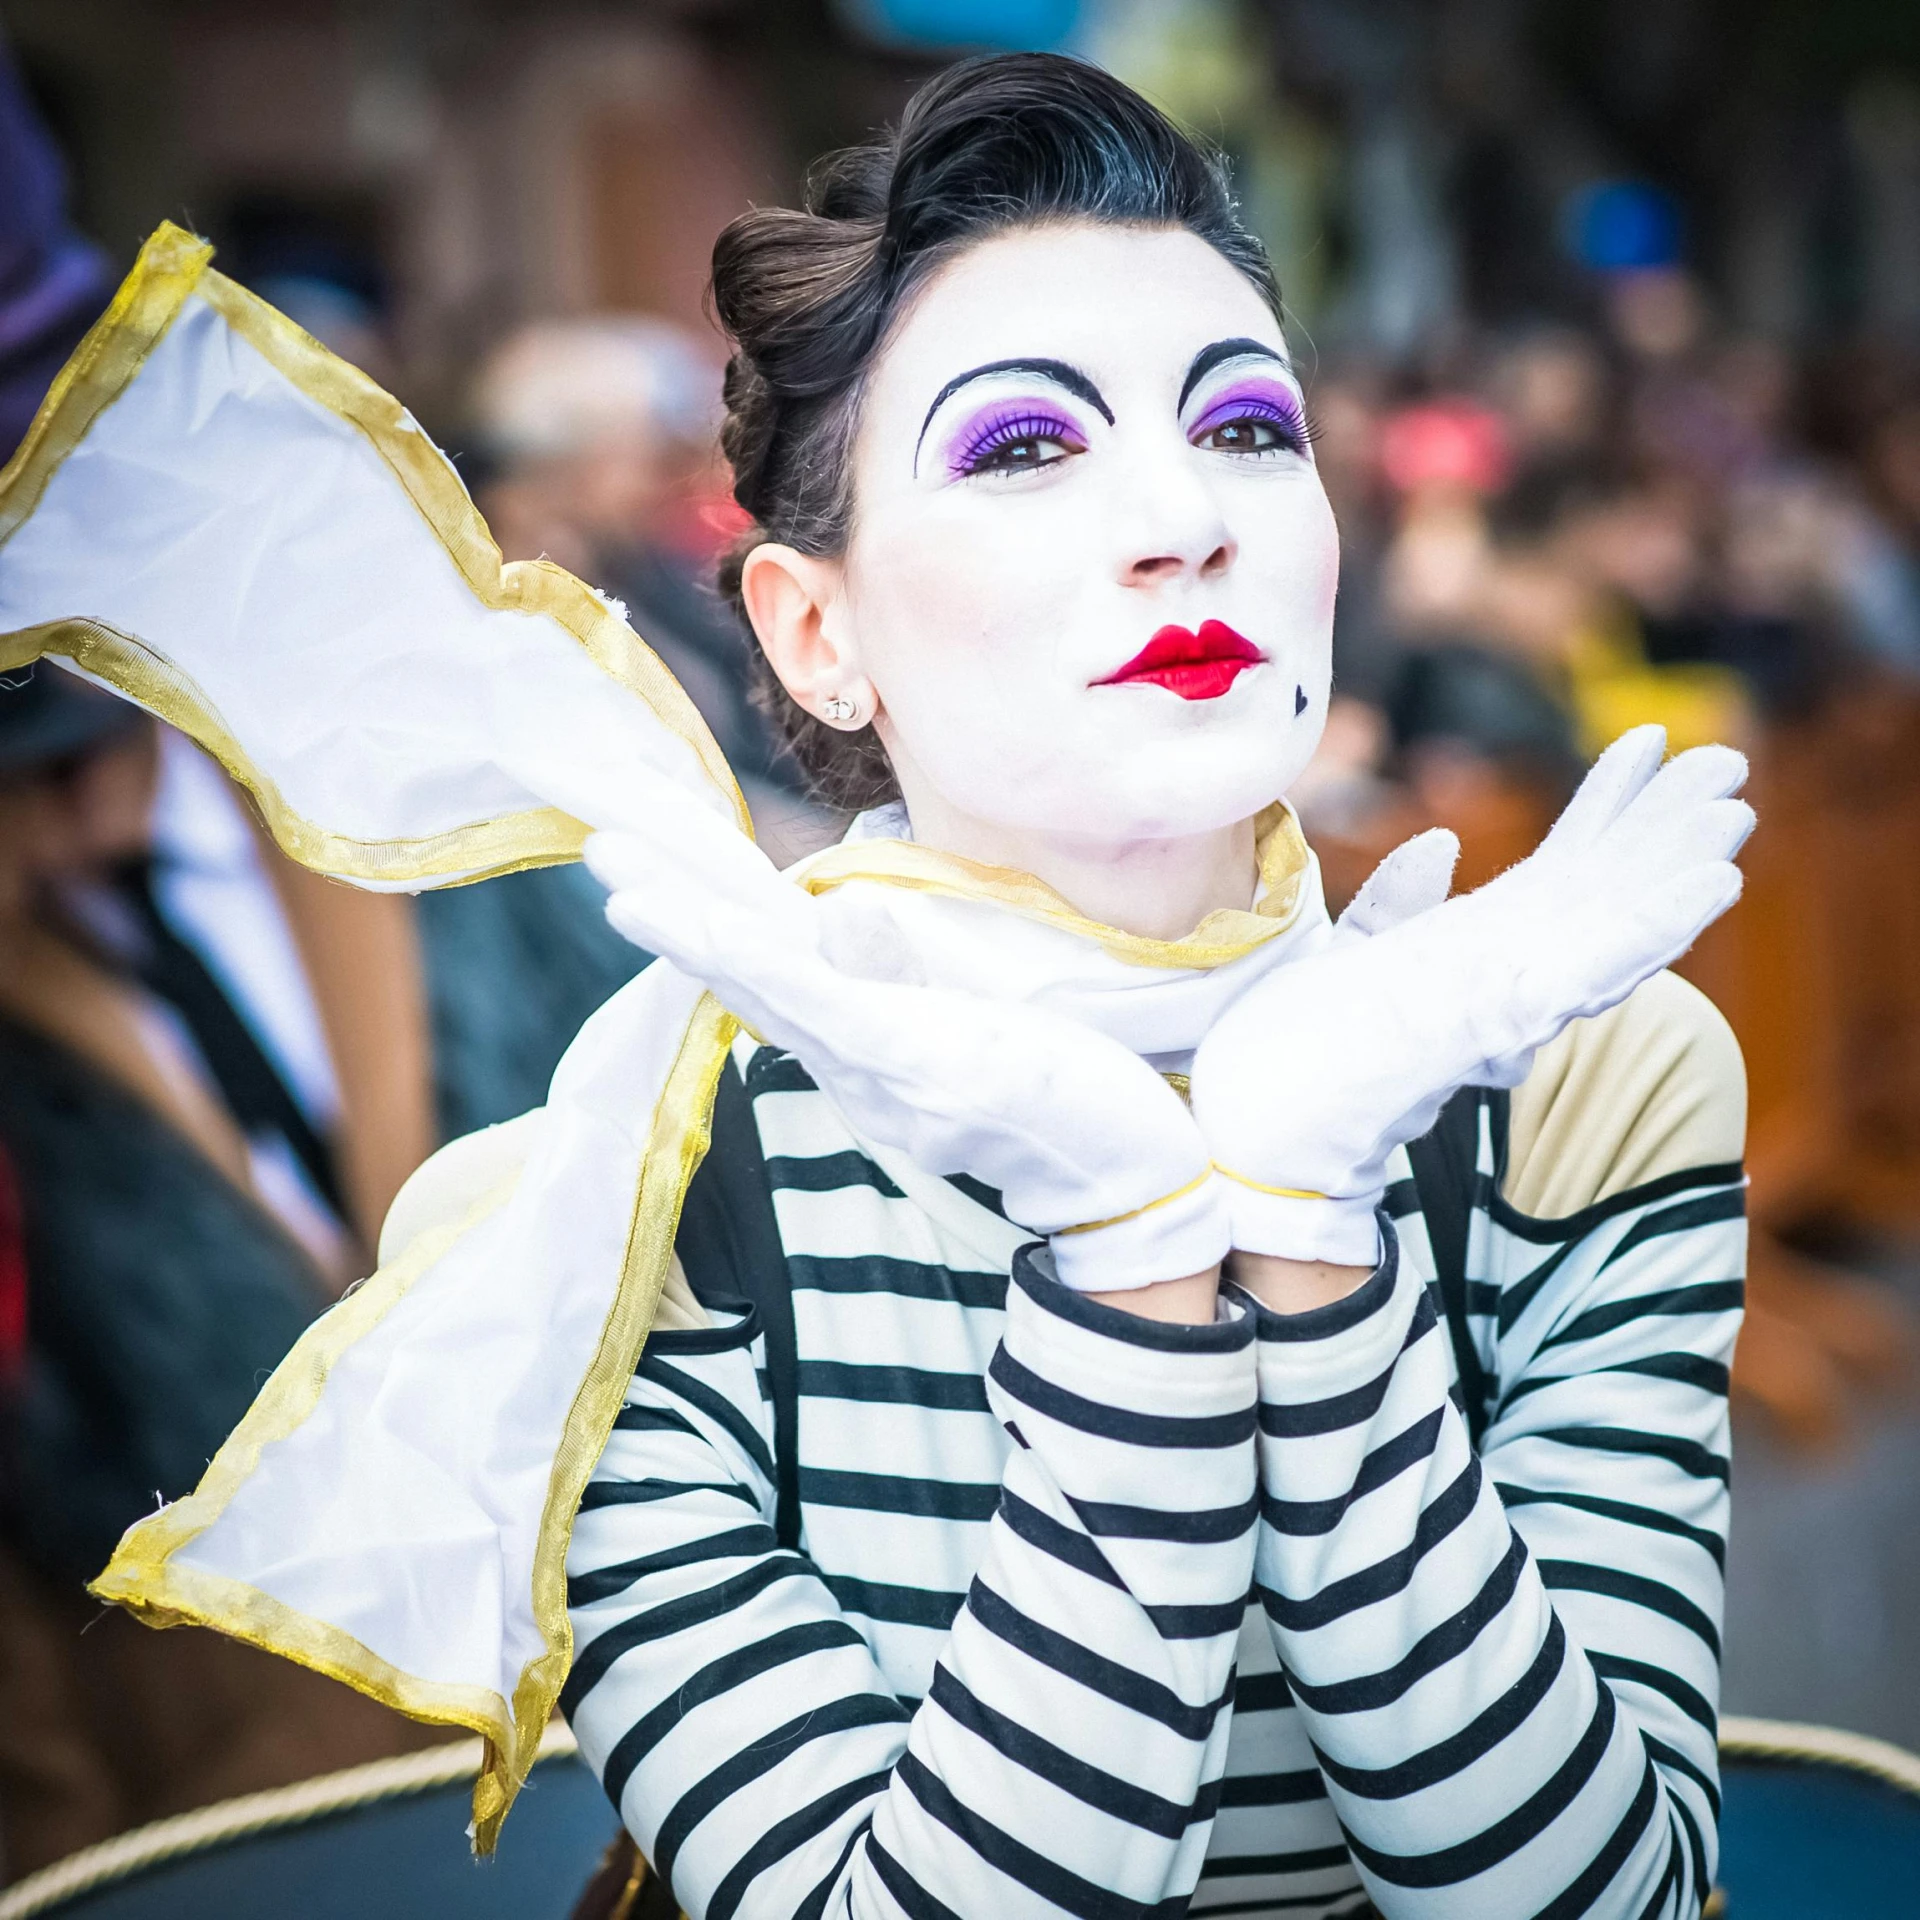 a woman with clown makeup and black and white costume